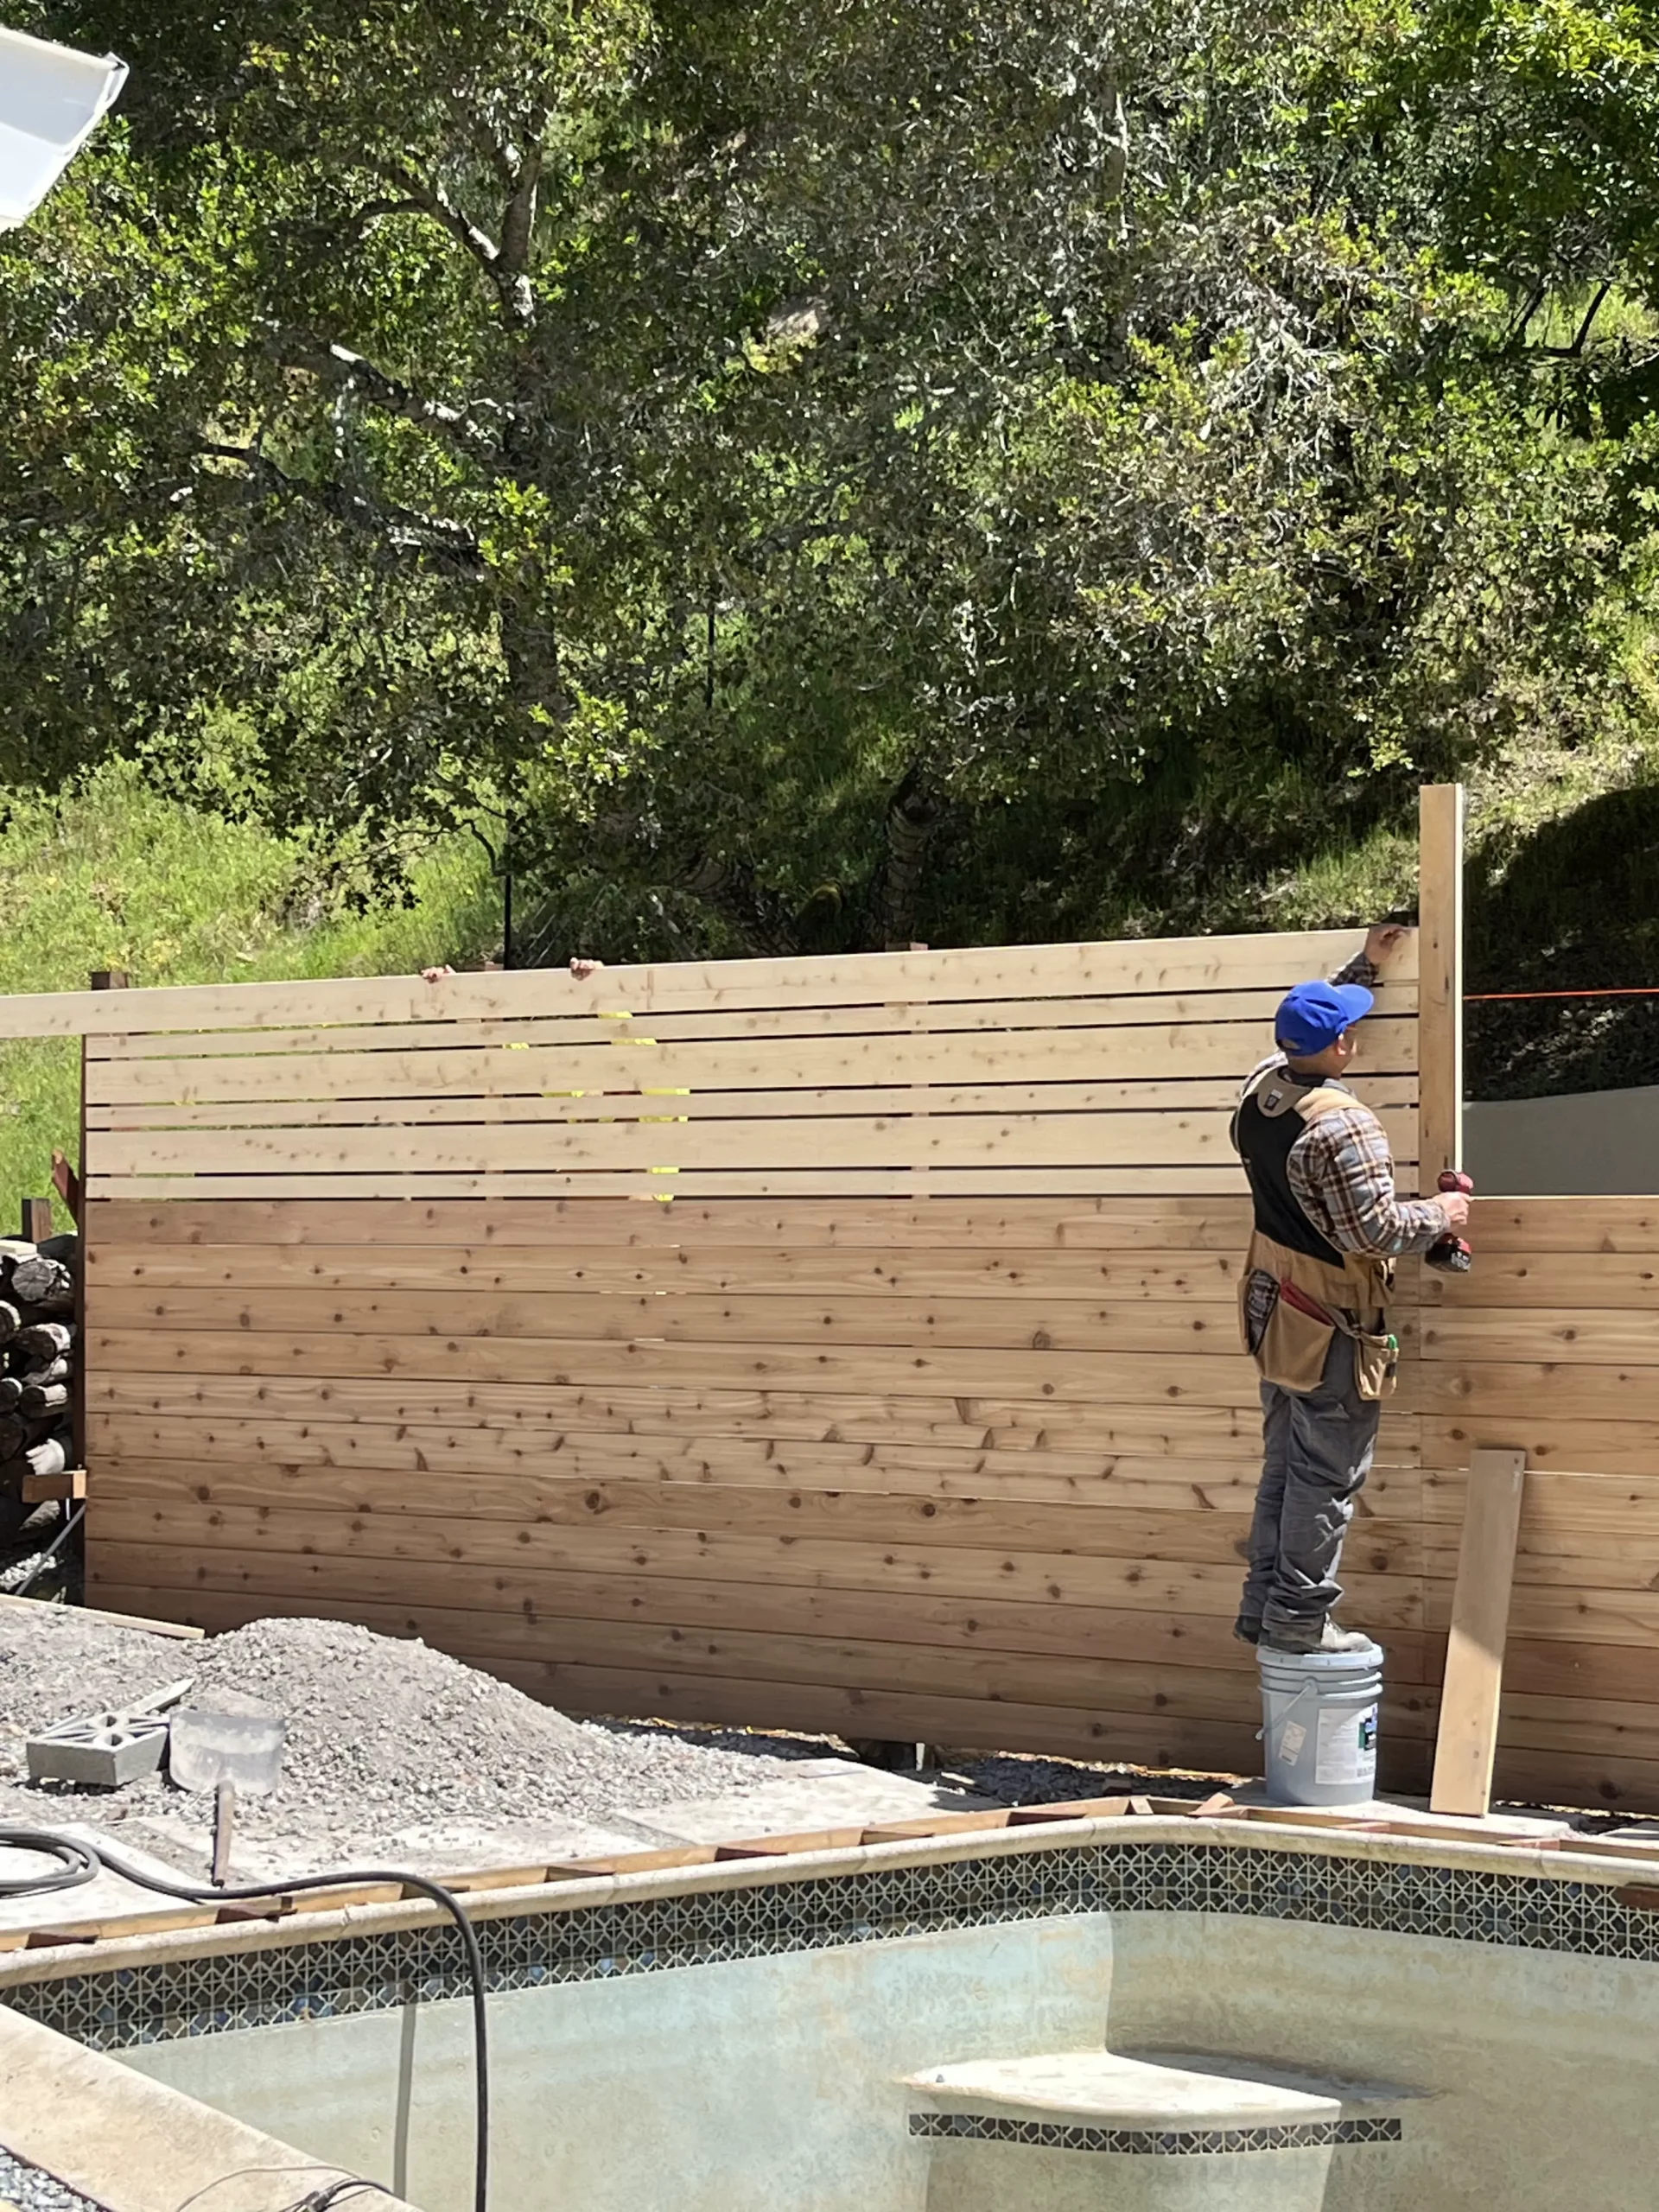 A man is working on a wooden fence near a pool.